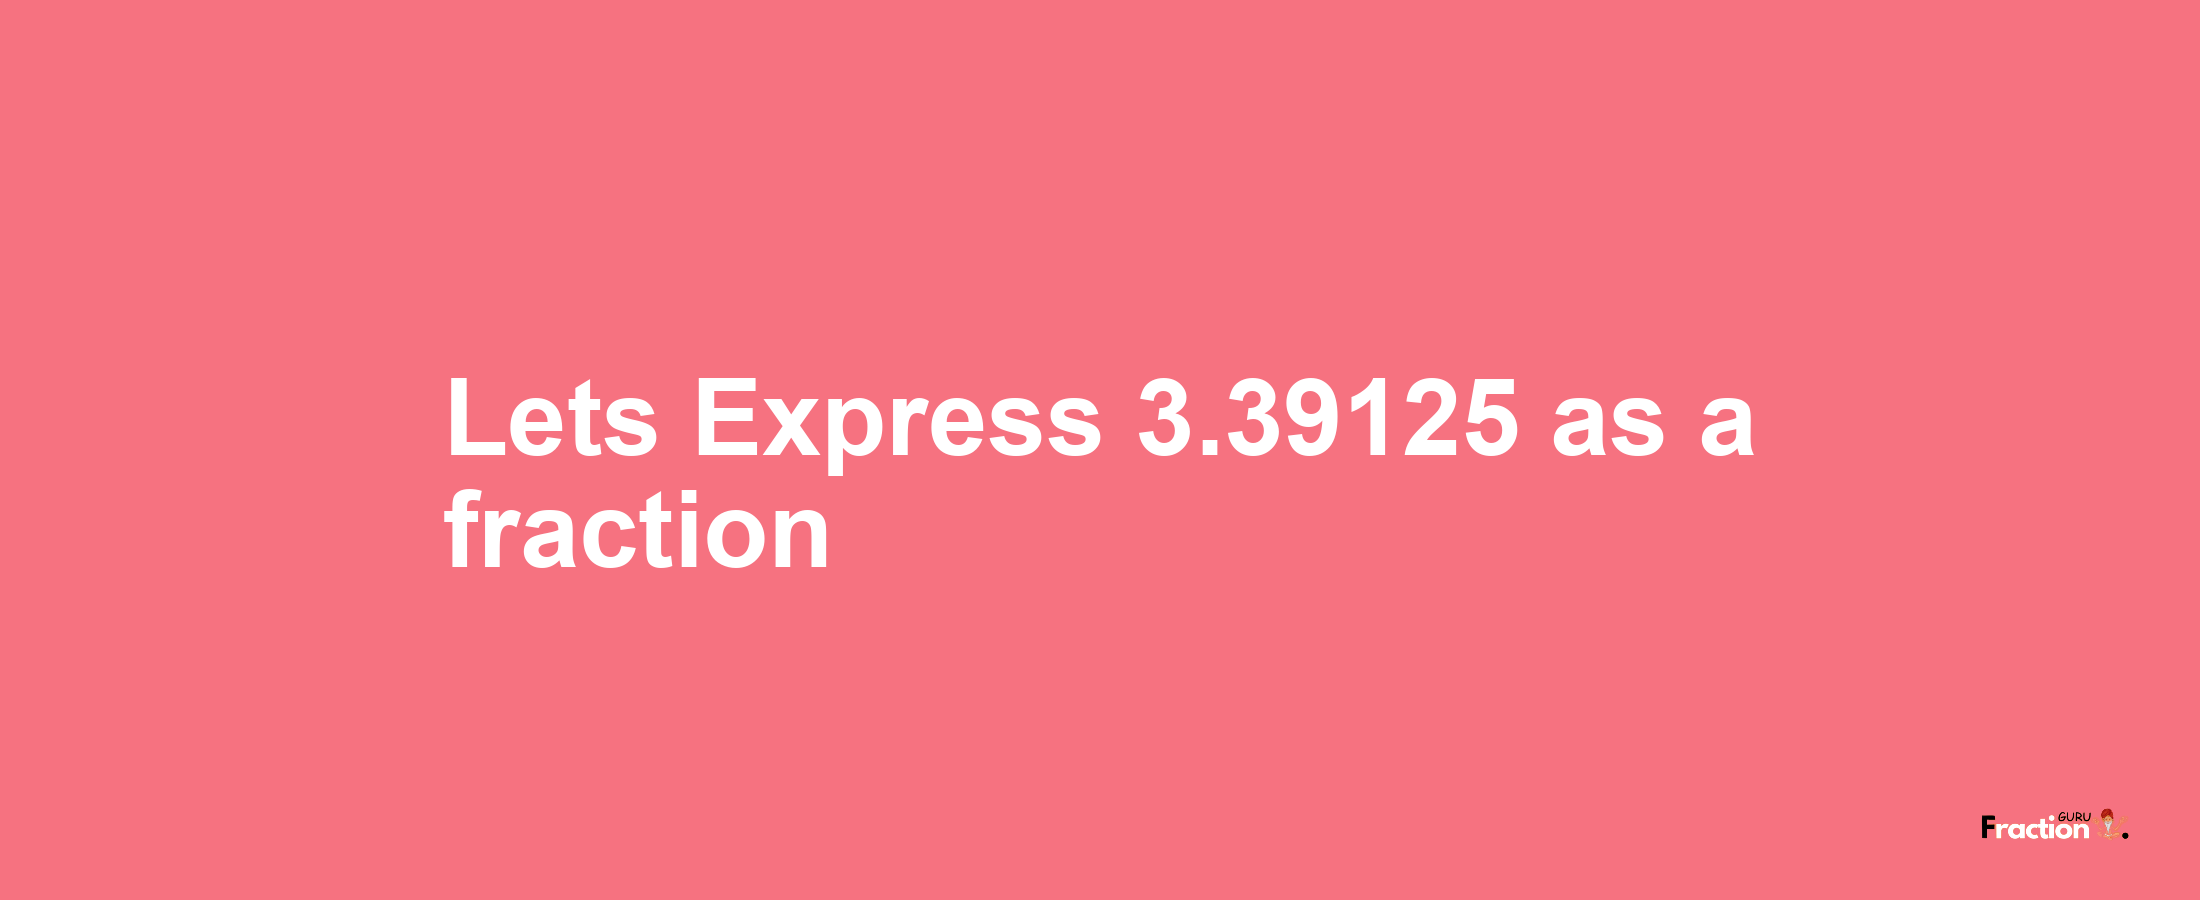 Lets Express 3.39125 as afraction